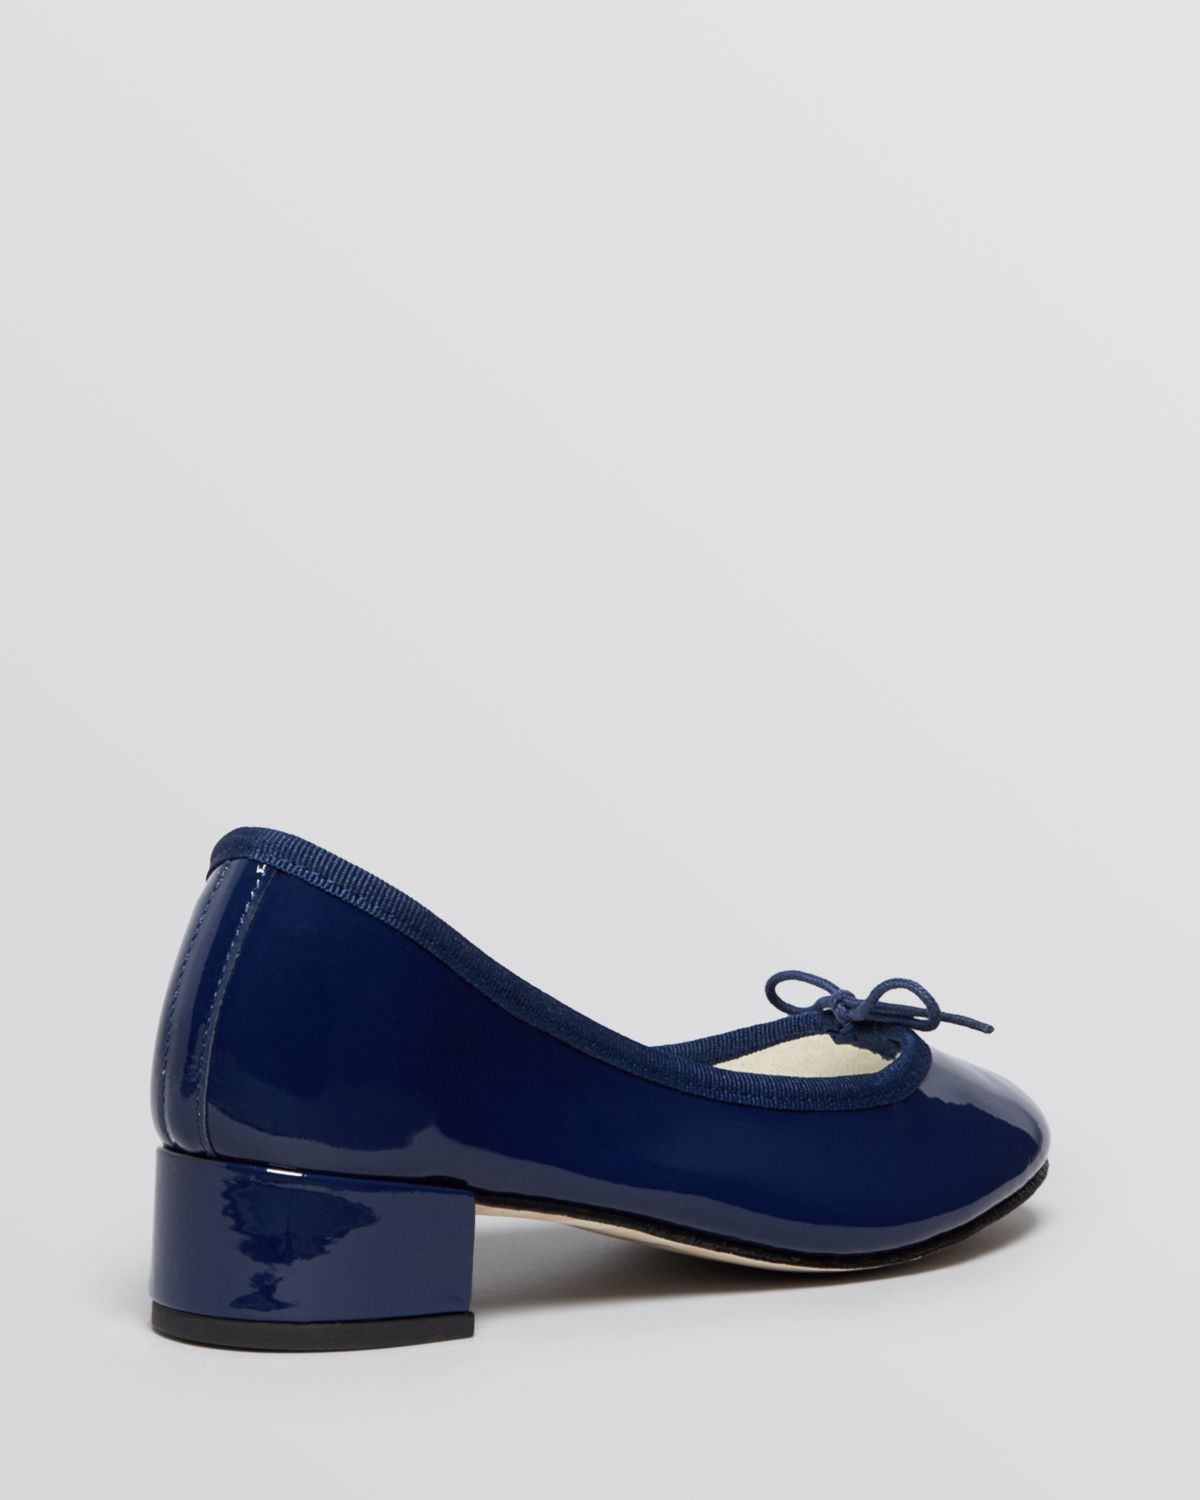 Lyst - Repetto Pumps - Camille Low Heel in Blue